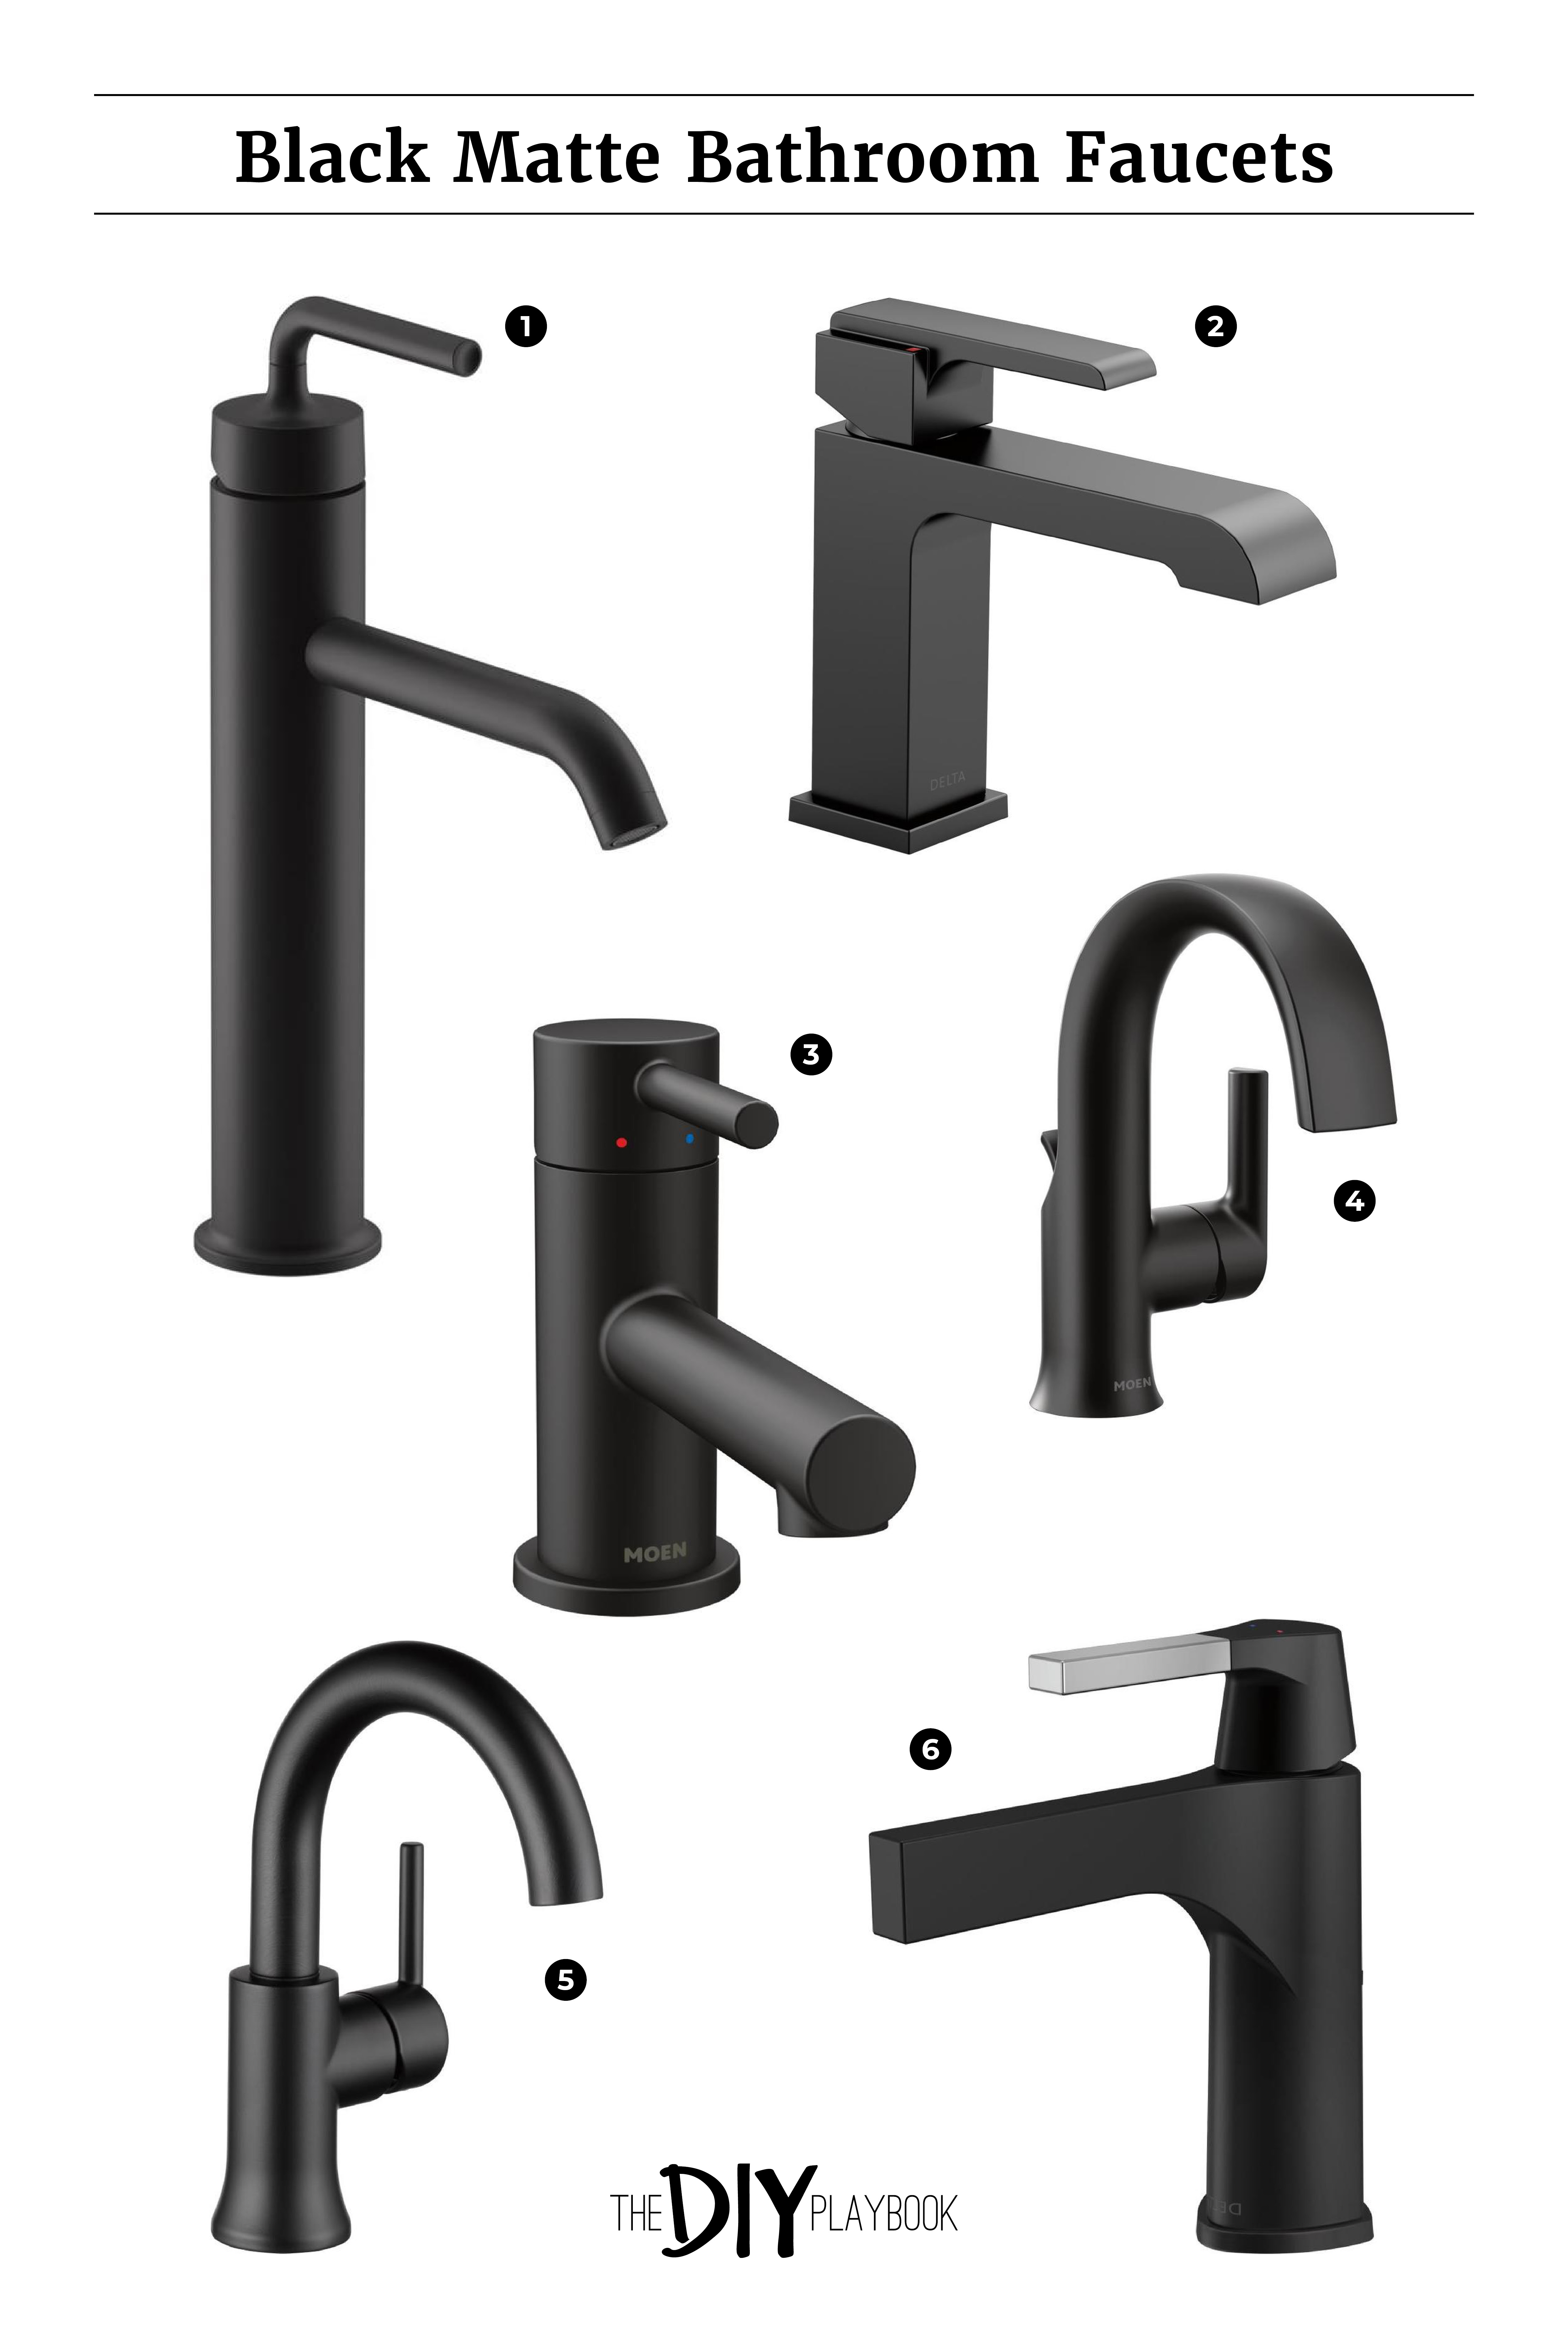 shopping for lowe's black faucets